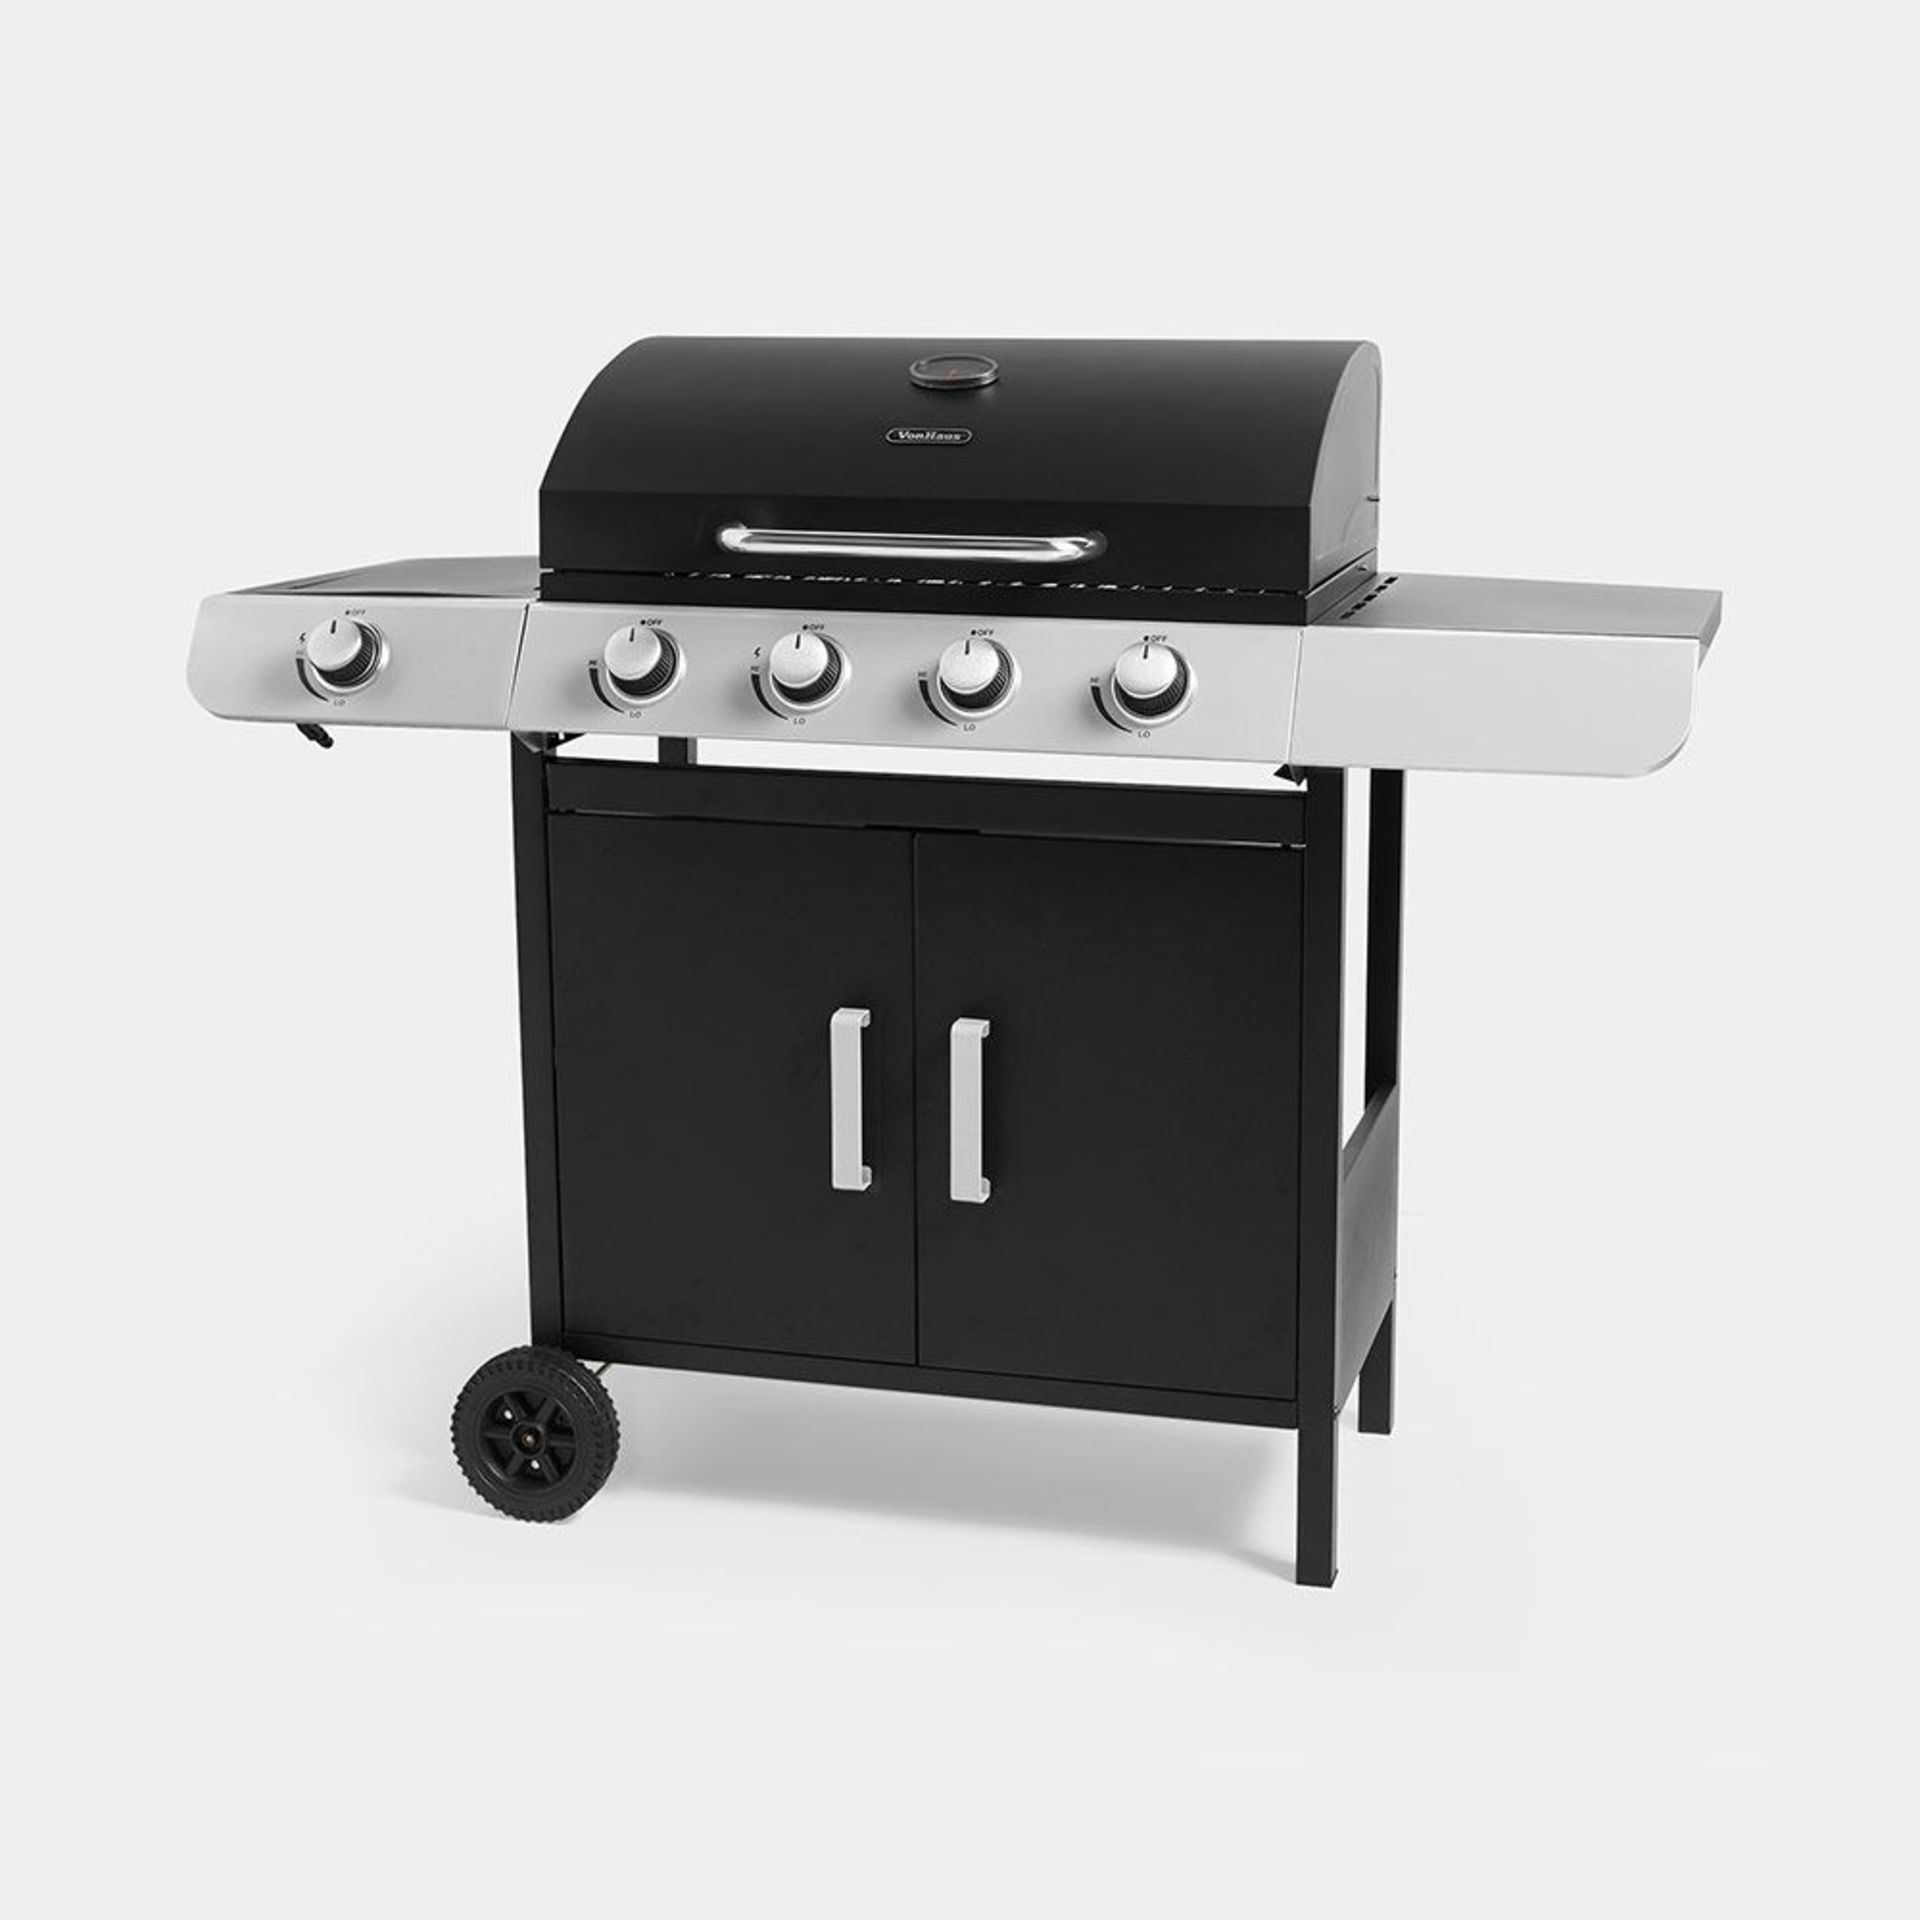 4+1 Burner Gas BBQ. - SR4. RRP £259.99. Summer's here, and it's time to fire up the grill! With